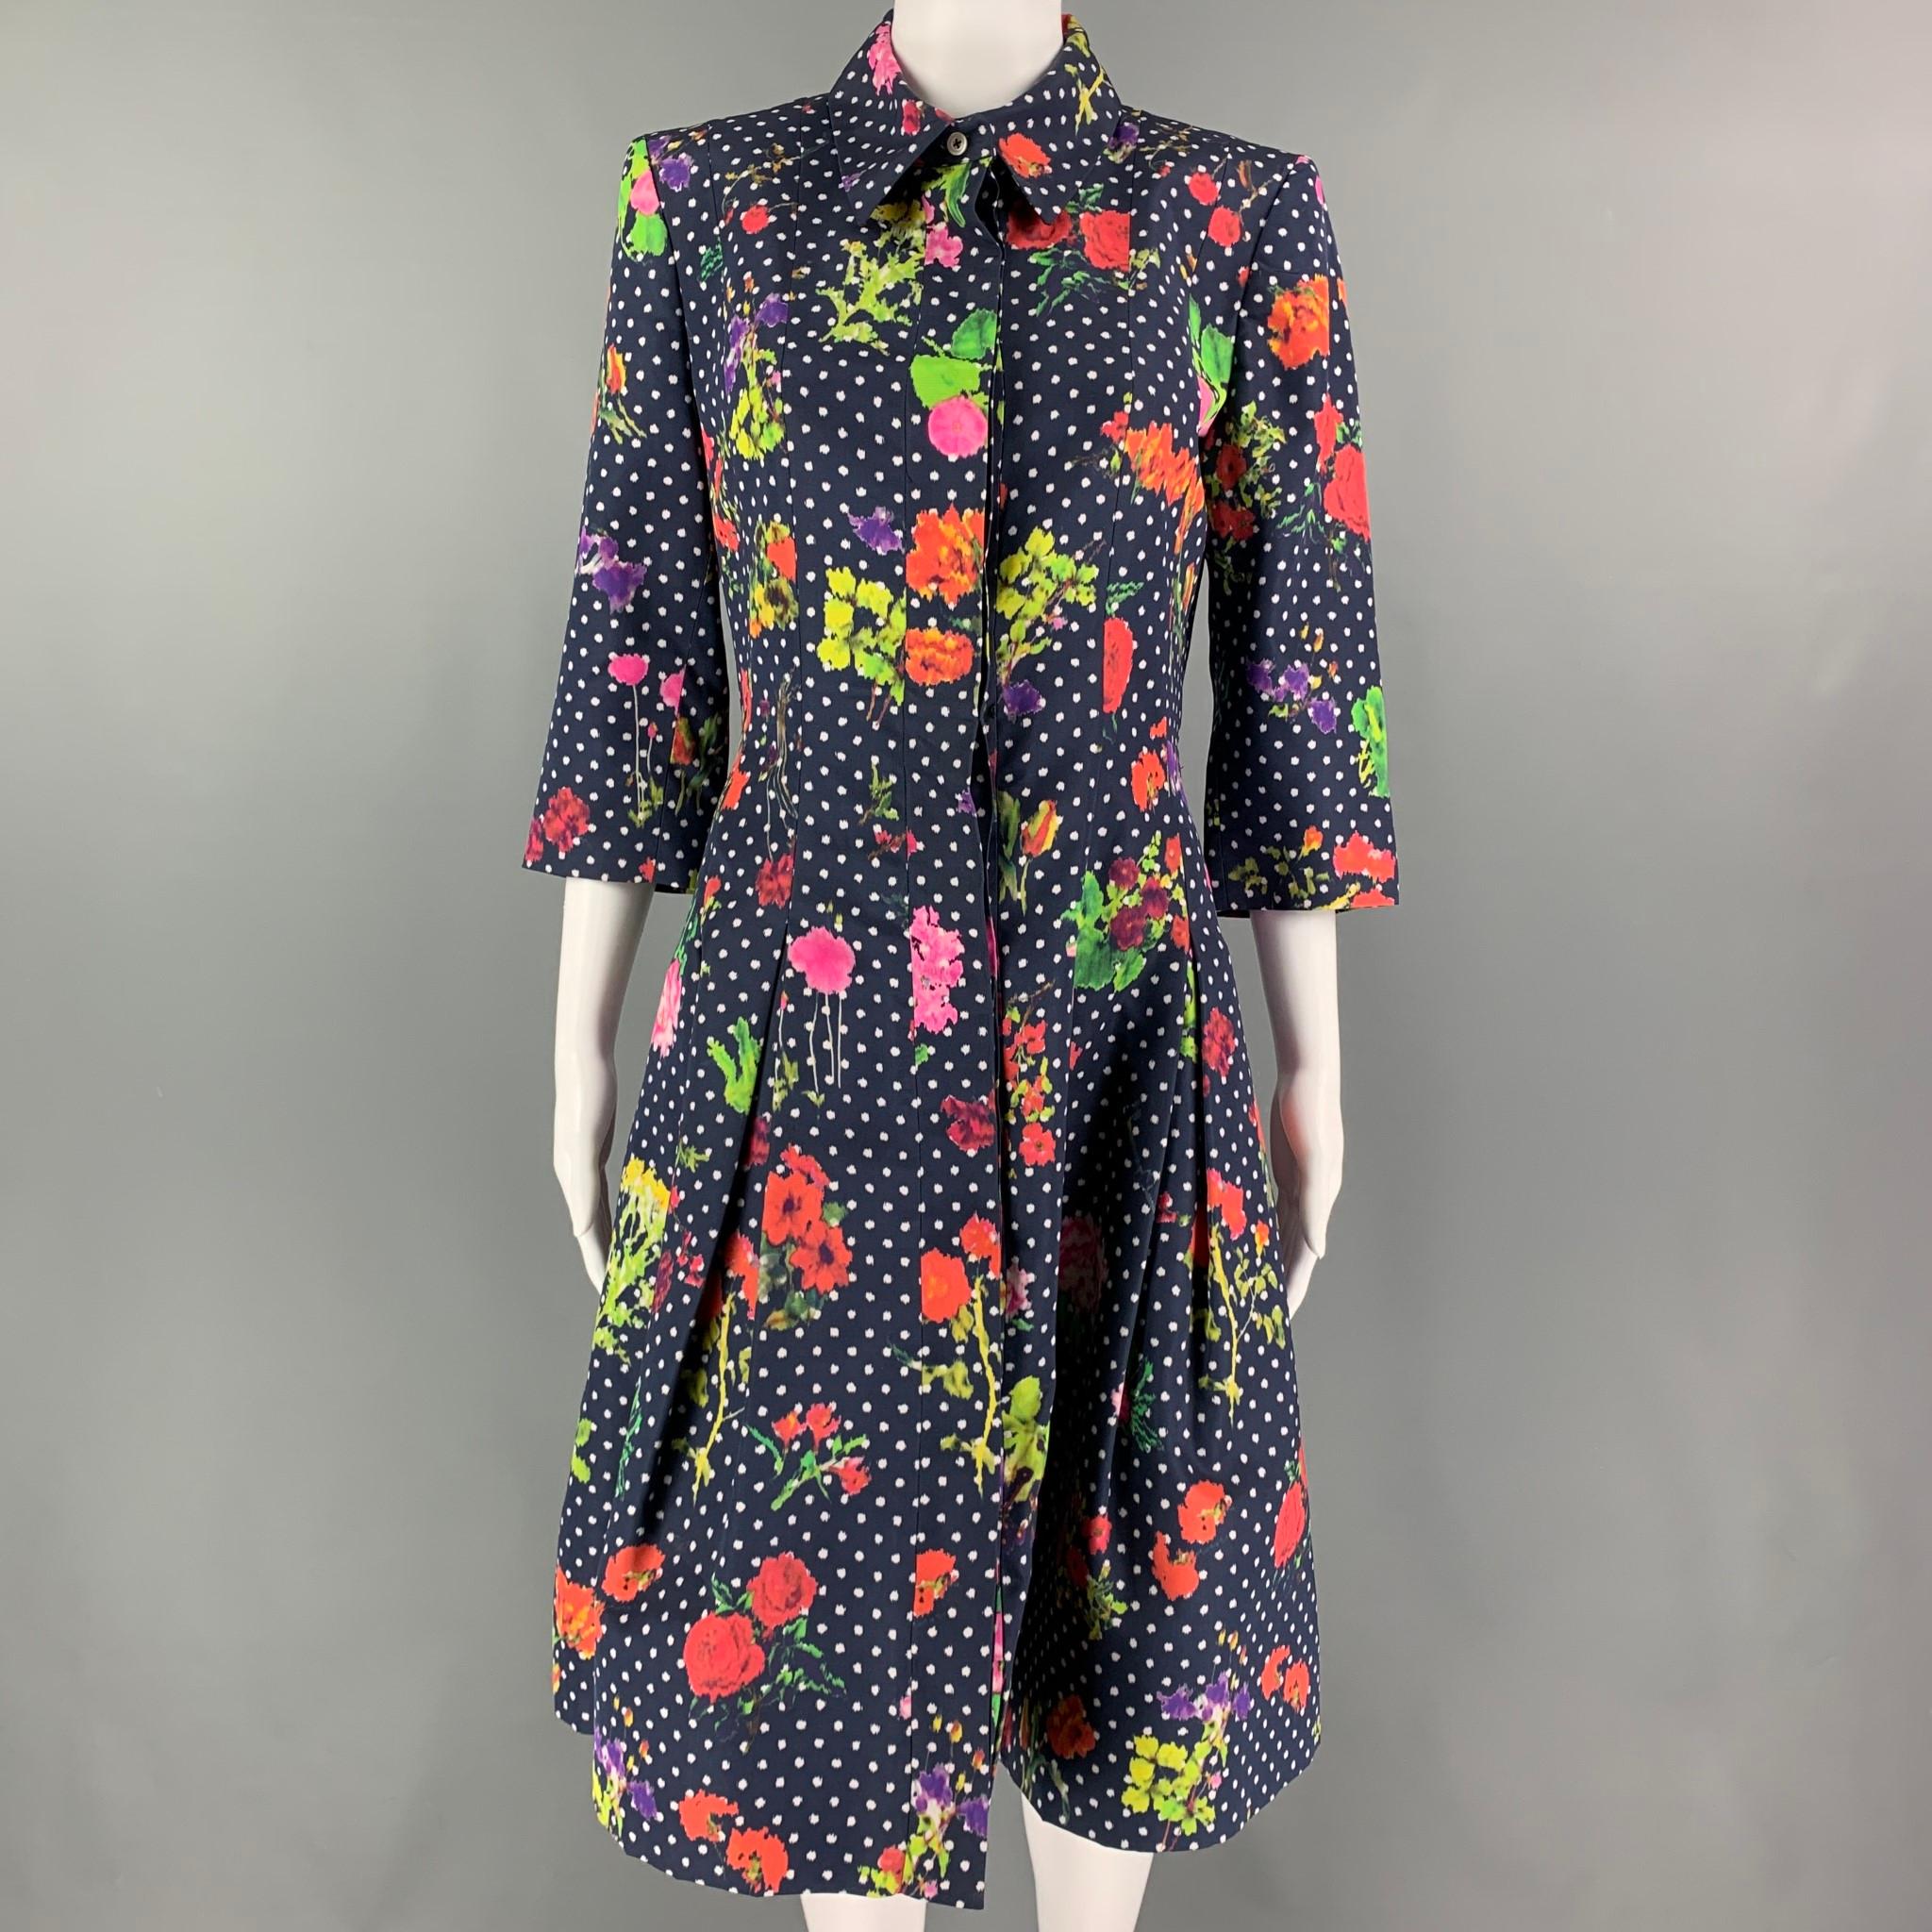 OSCAR DE LA DENTA coat comes in a multi-color floral silk featuring a full skirt design, pointed collar, and a hidden placket closure. 

Excellent Pre-Owned Condition.
Marked: 6

Measurements:

Shoulder: 15.5 in.
Bust: 34 in.
Sleeve: 17.5